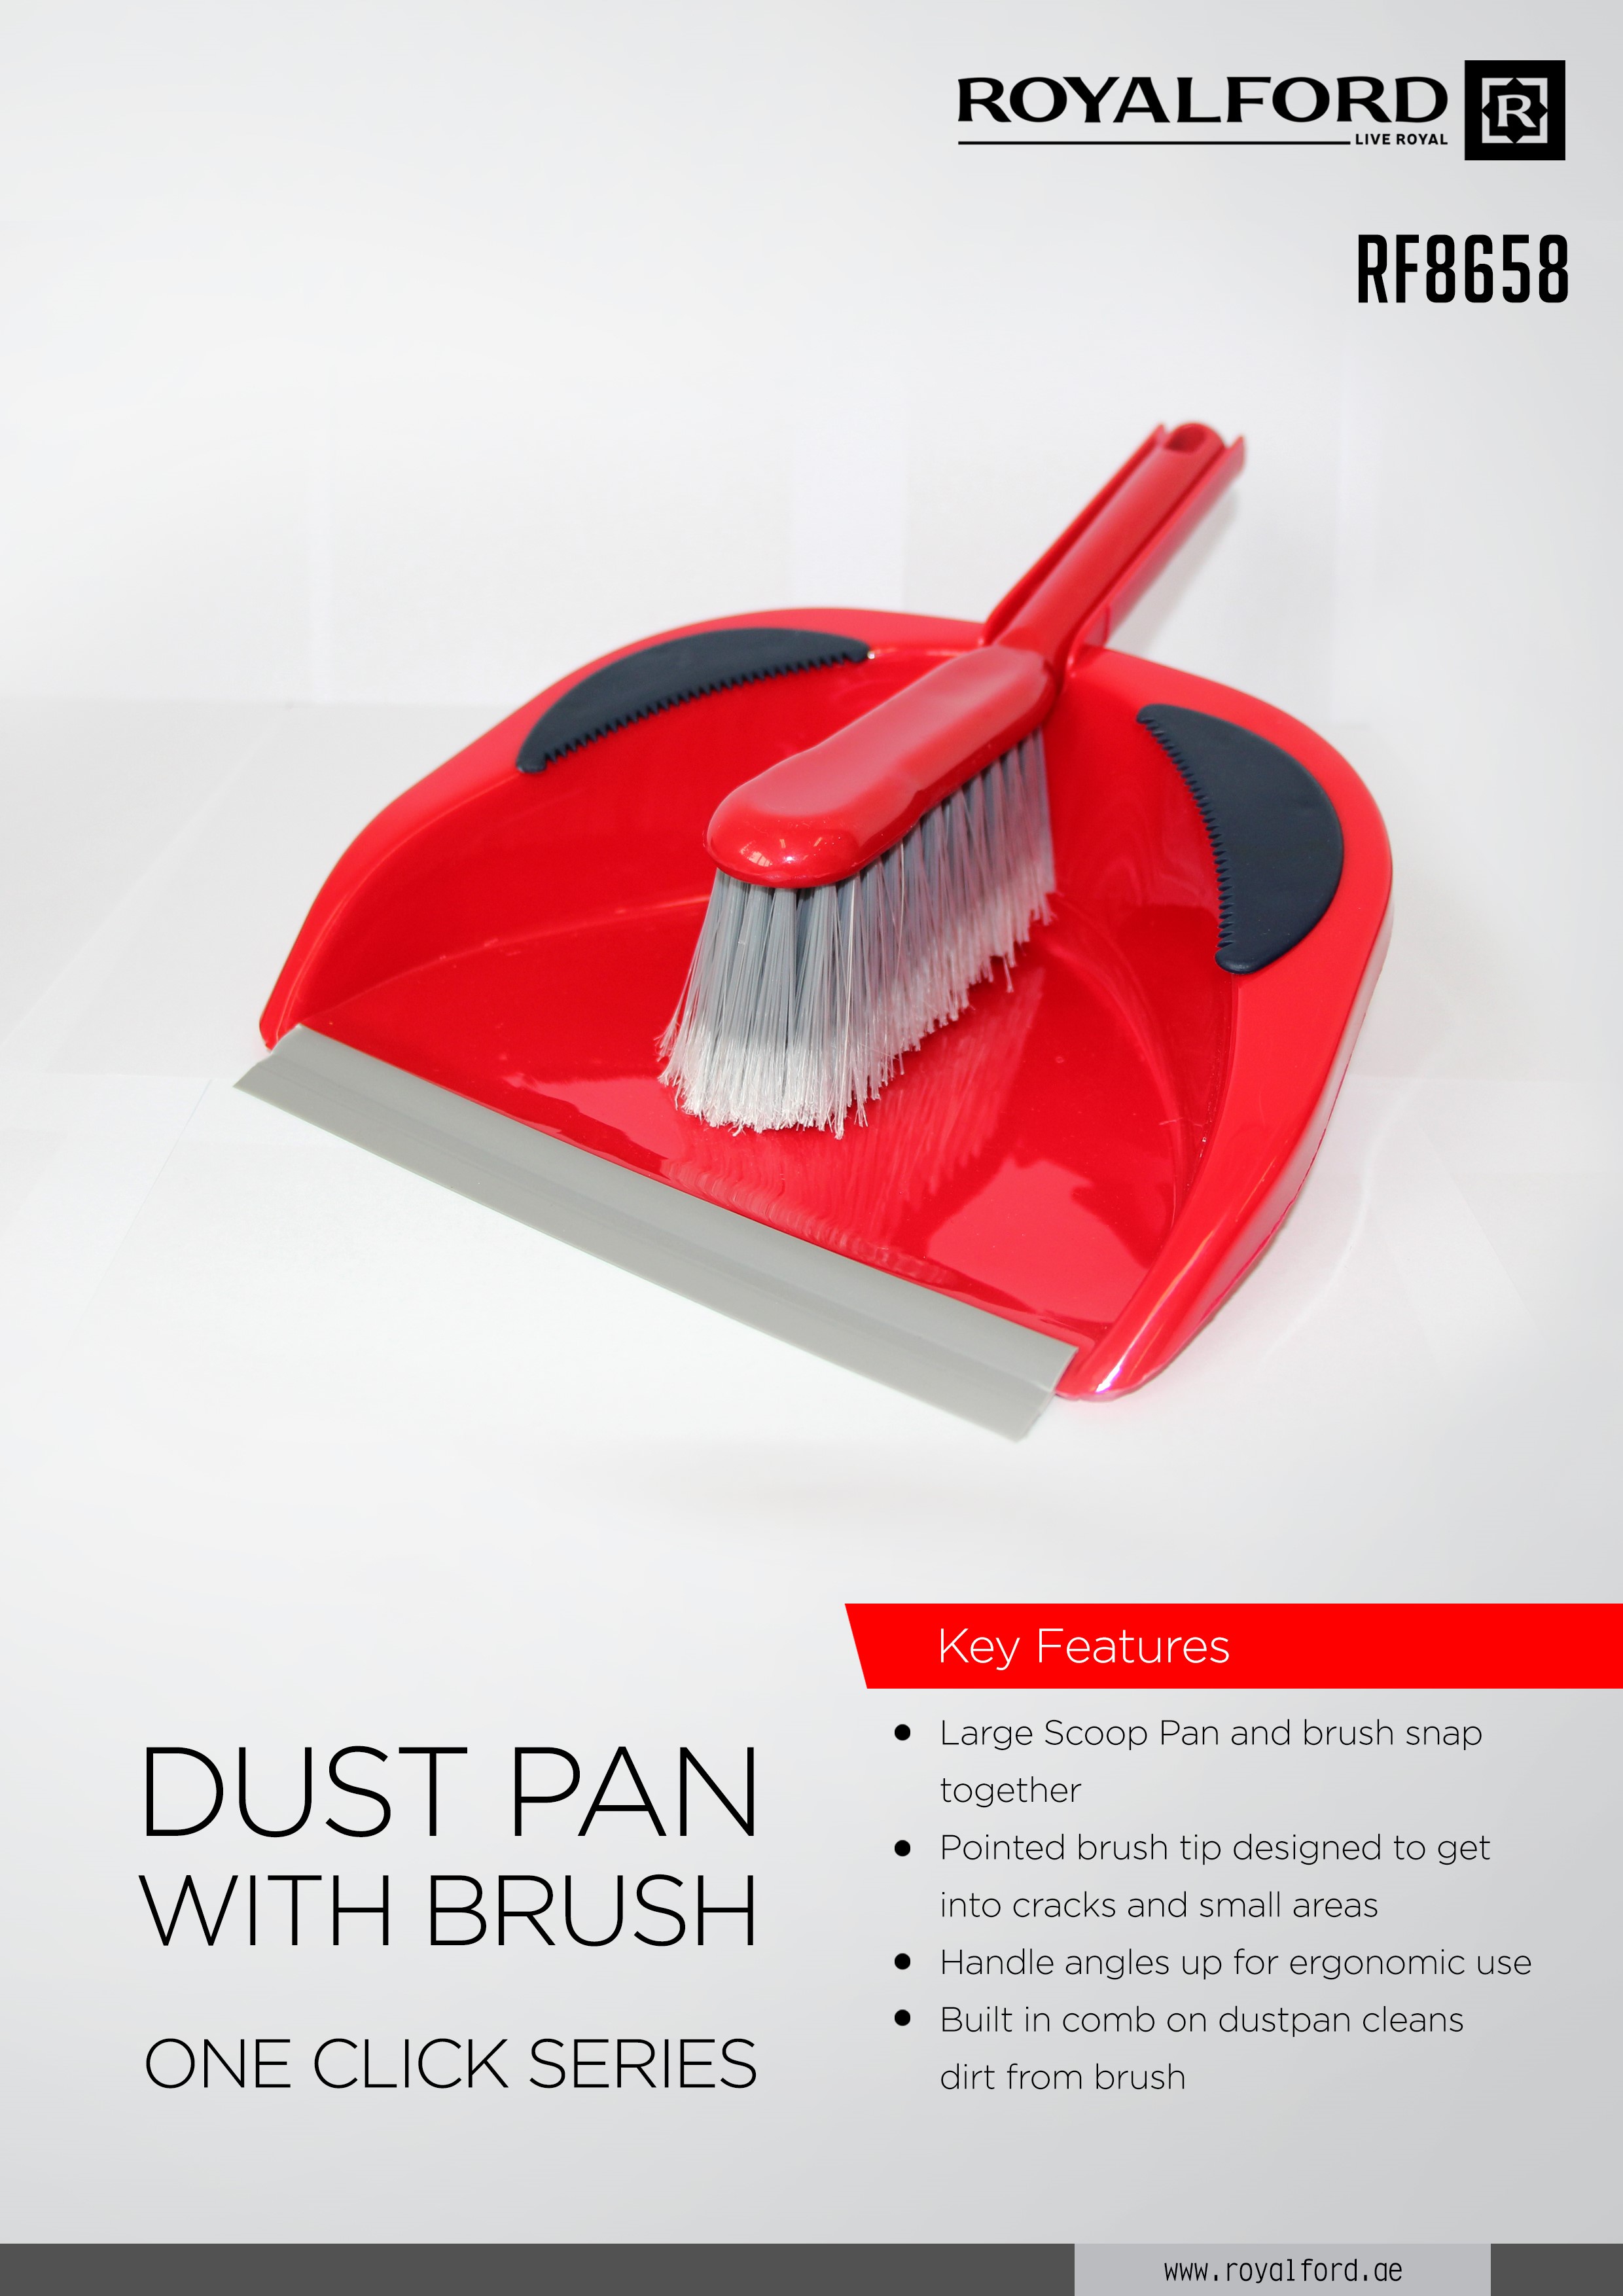 Delcasa 6Pcs Floor Cleaning Set With Dust Pan, Hard Brush, Soft Brush,  Cleaning Brush, Squeegee